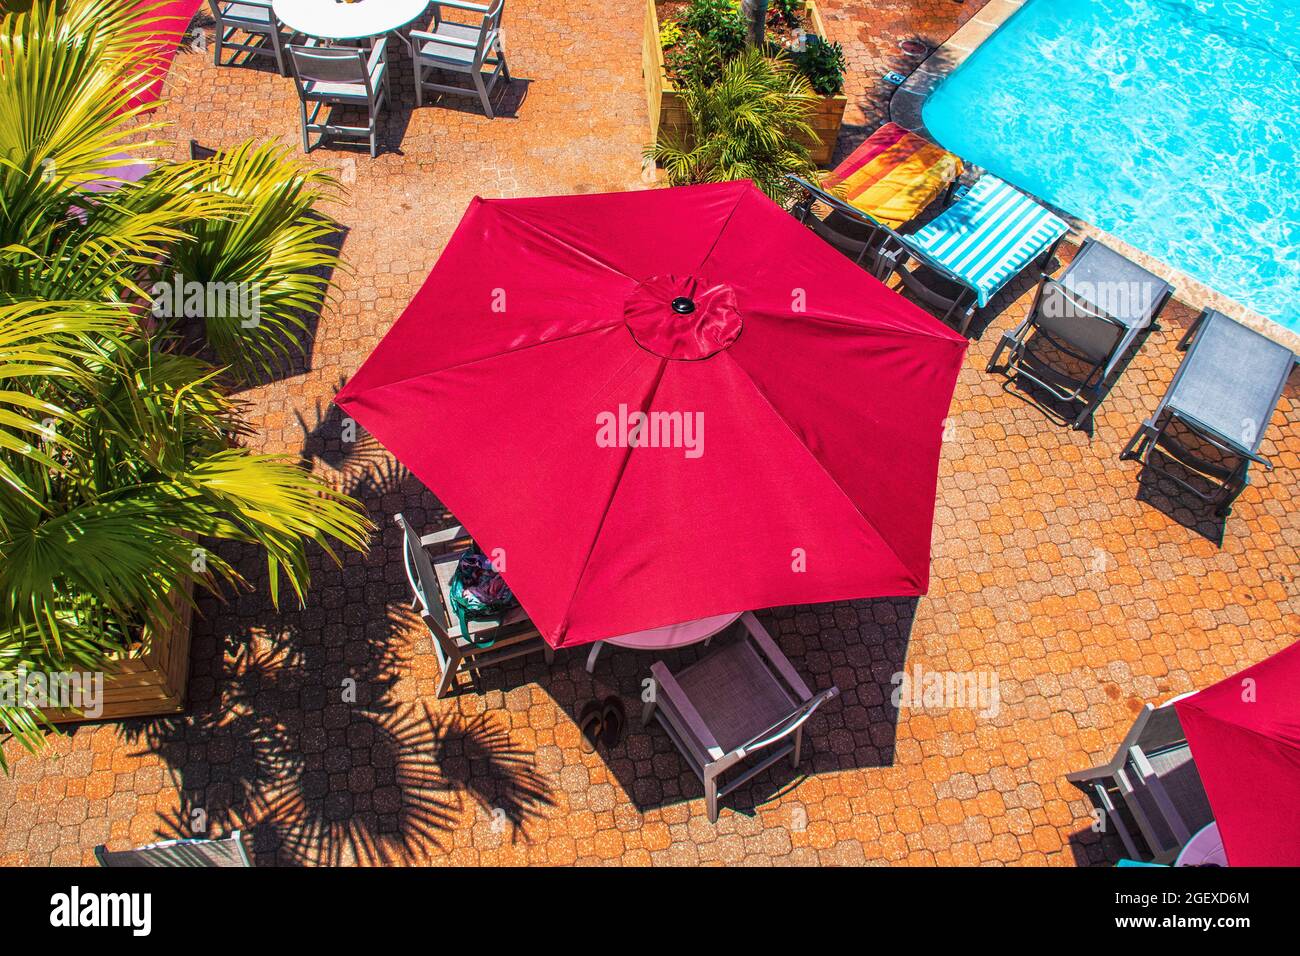 Poolside textured red umbrellas over tables and chairs beside lounges covered in beach towels and potted palms on orange tile deck on sunny day - top Stock Photo